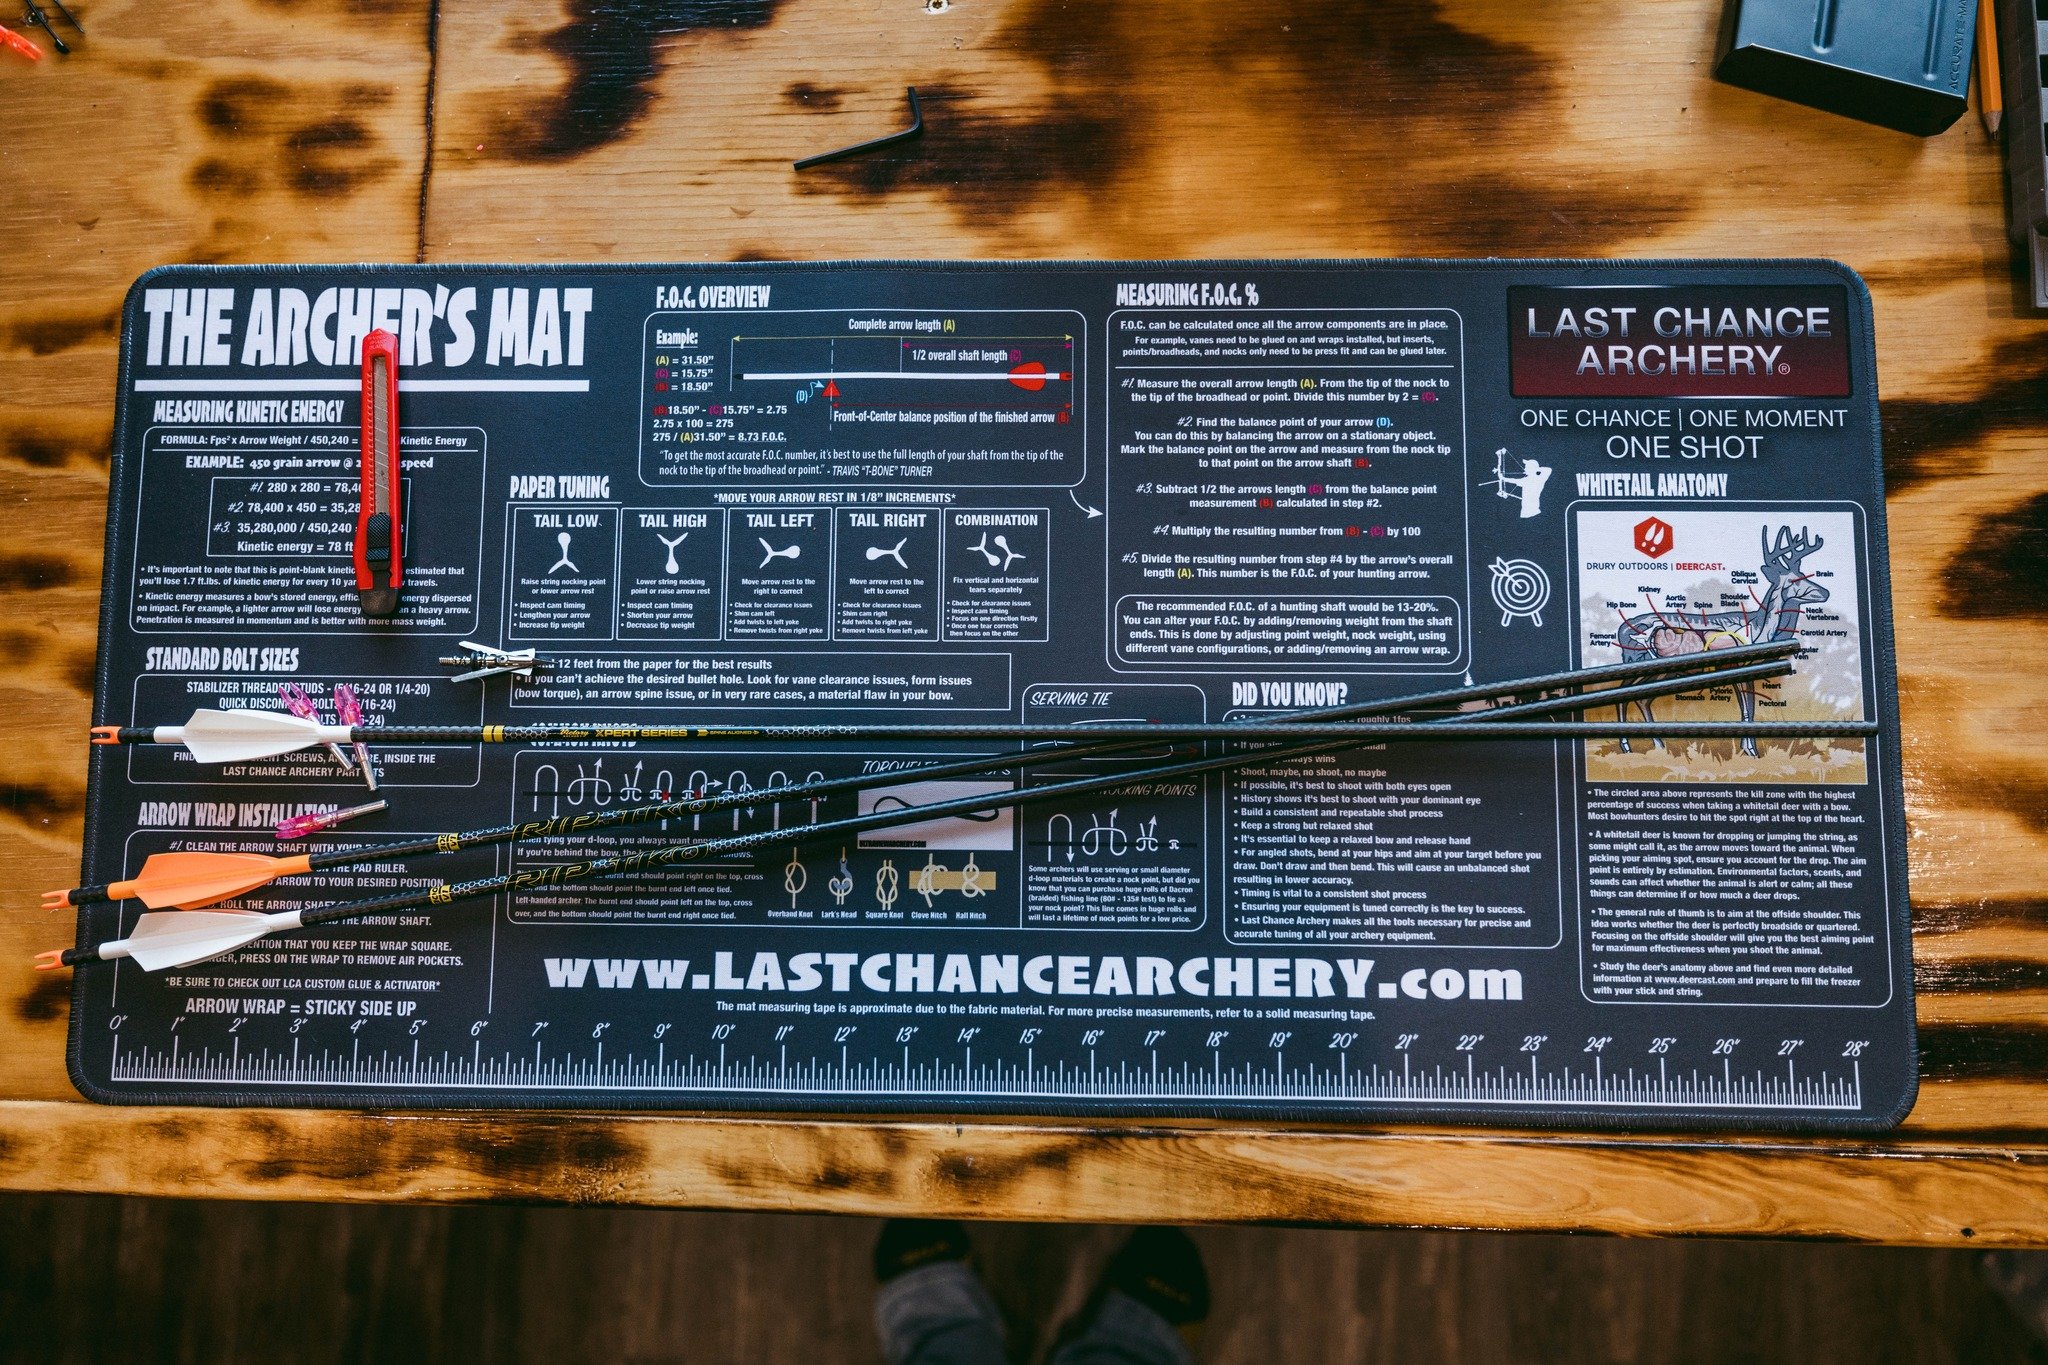 Sometimes, the best products are the simplest products. Check out The Archer's Mat today!! 

#archerytools #archery #tuning #bestarcherytools #lastchancearchery